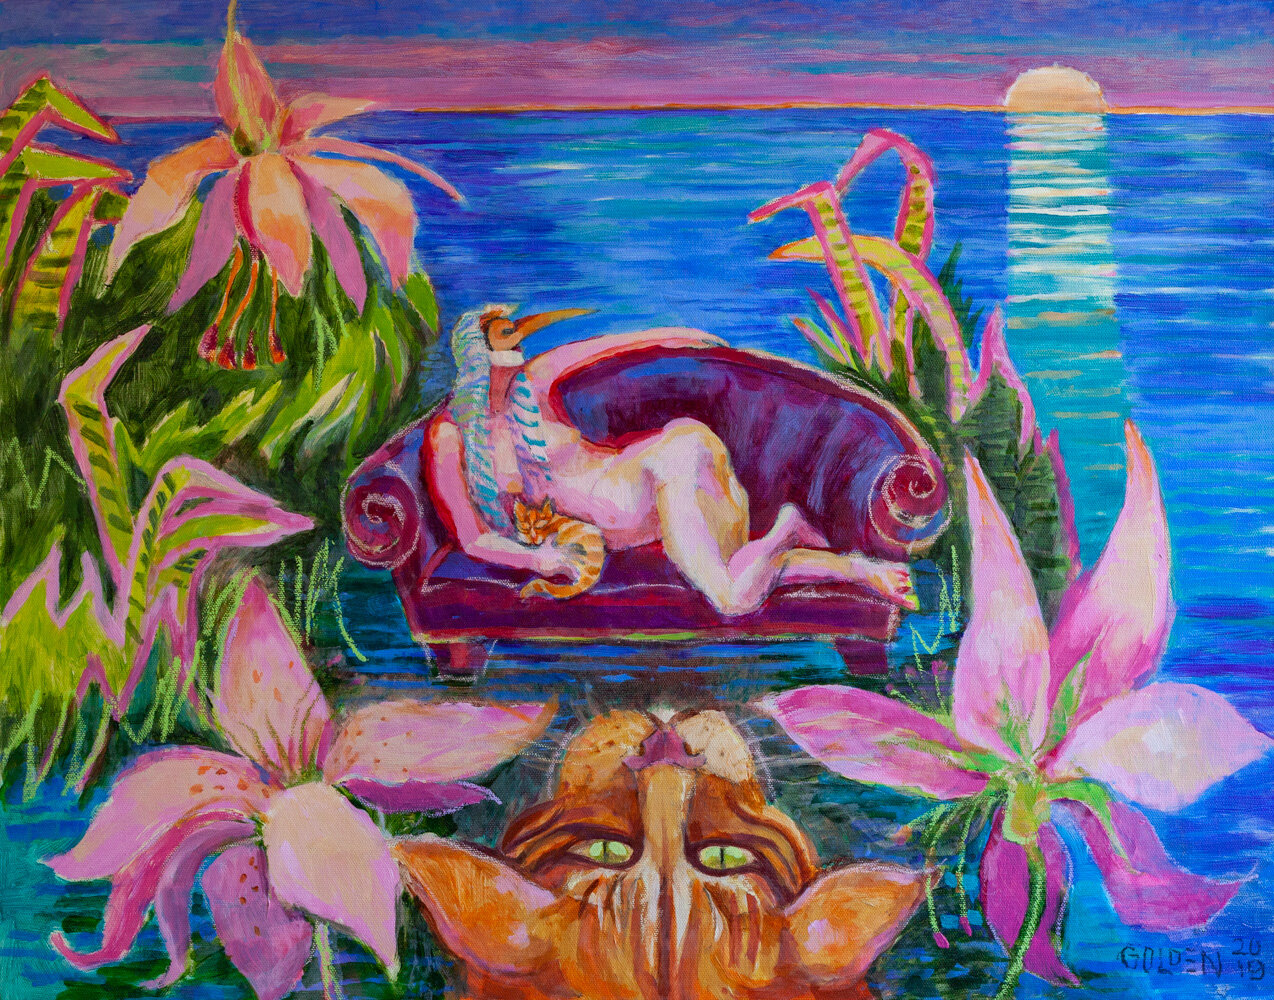 Thespian Adrift with Tiger Lilies, 2019